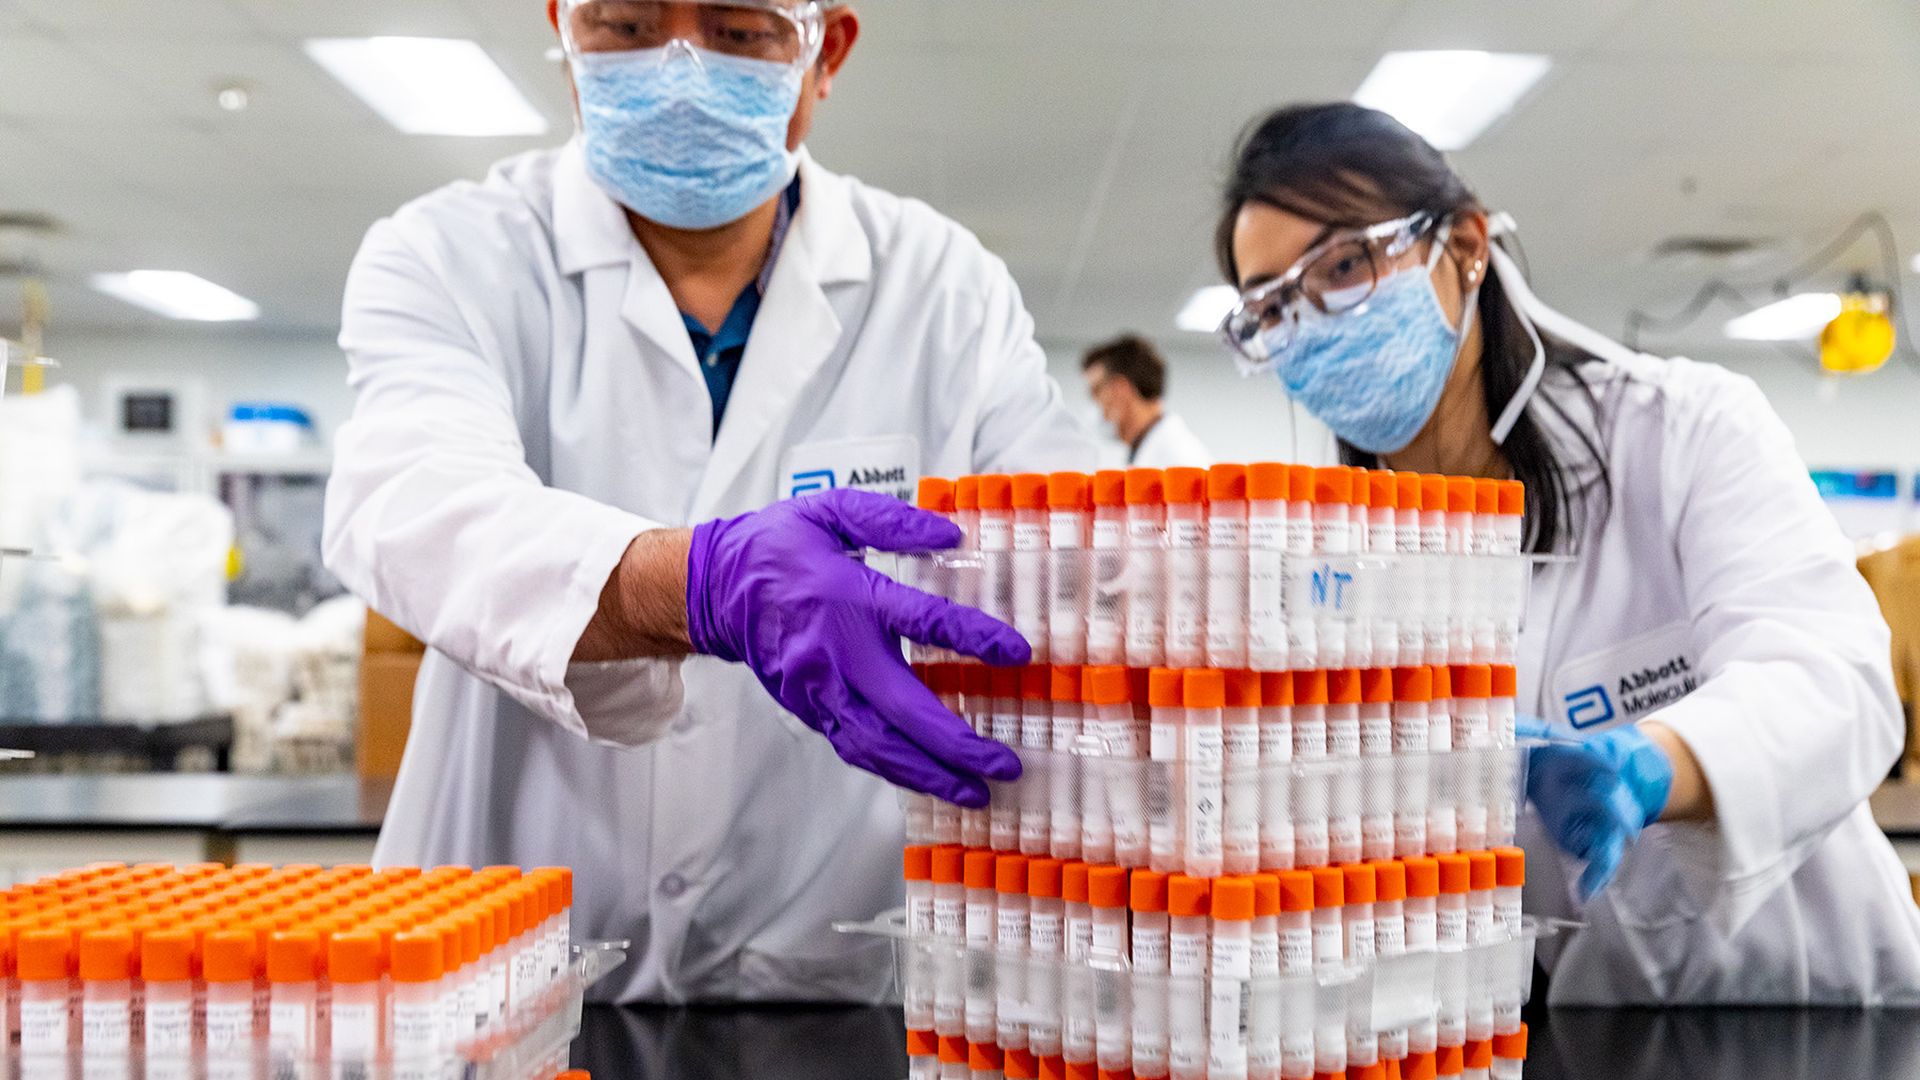 Two people in white lab coats handle stacks of test tubes with orange caps.